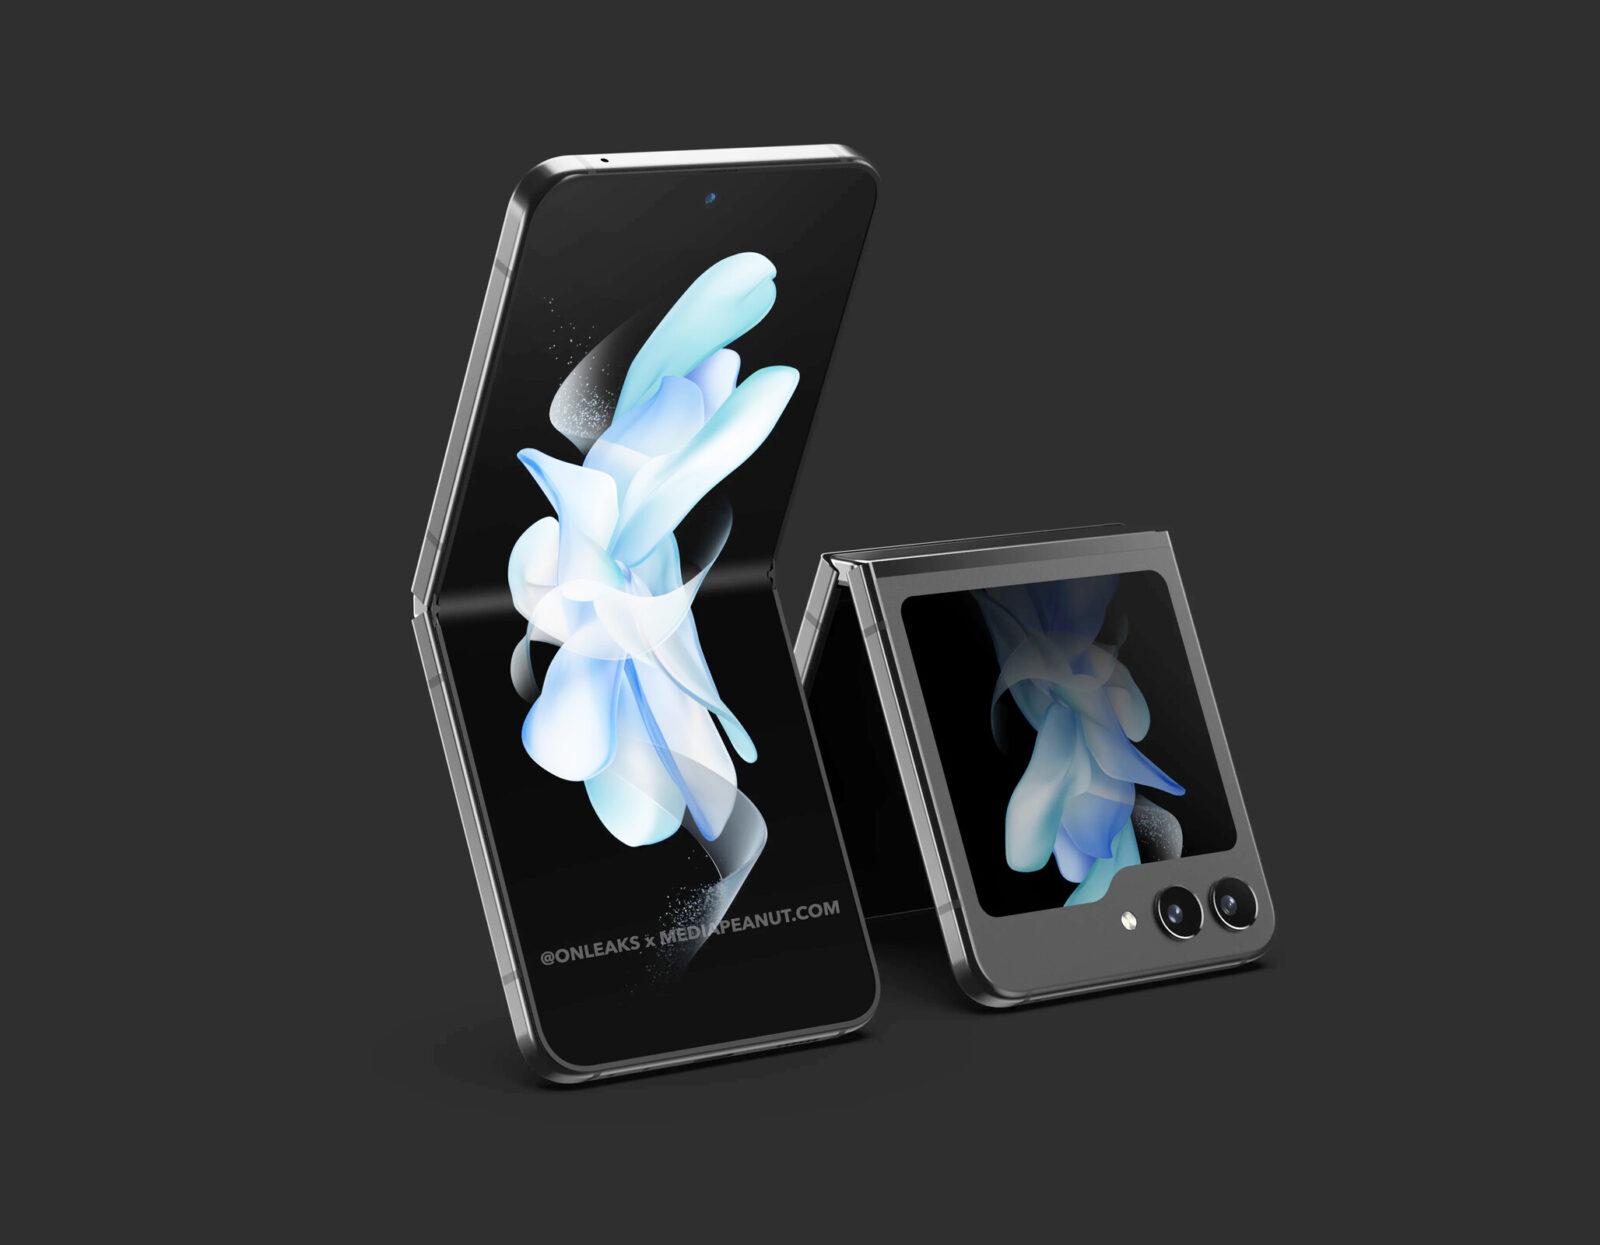 Rumour: Galaxy Flip 5 and Galaxy Fold 5 to be unveiled on 26 July